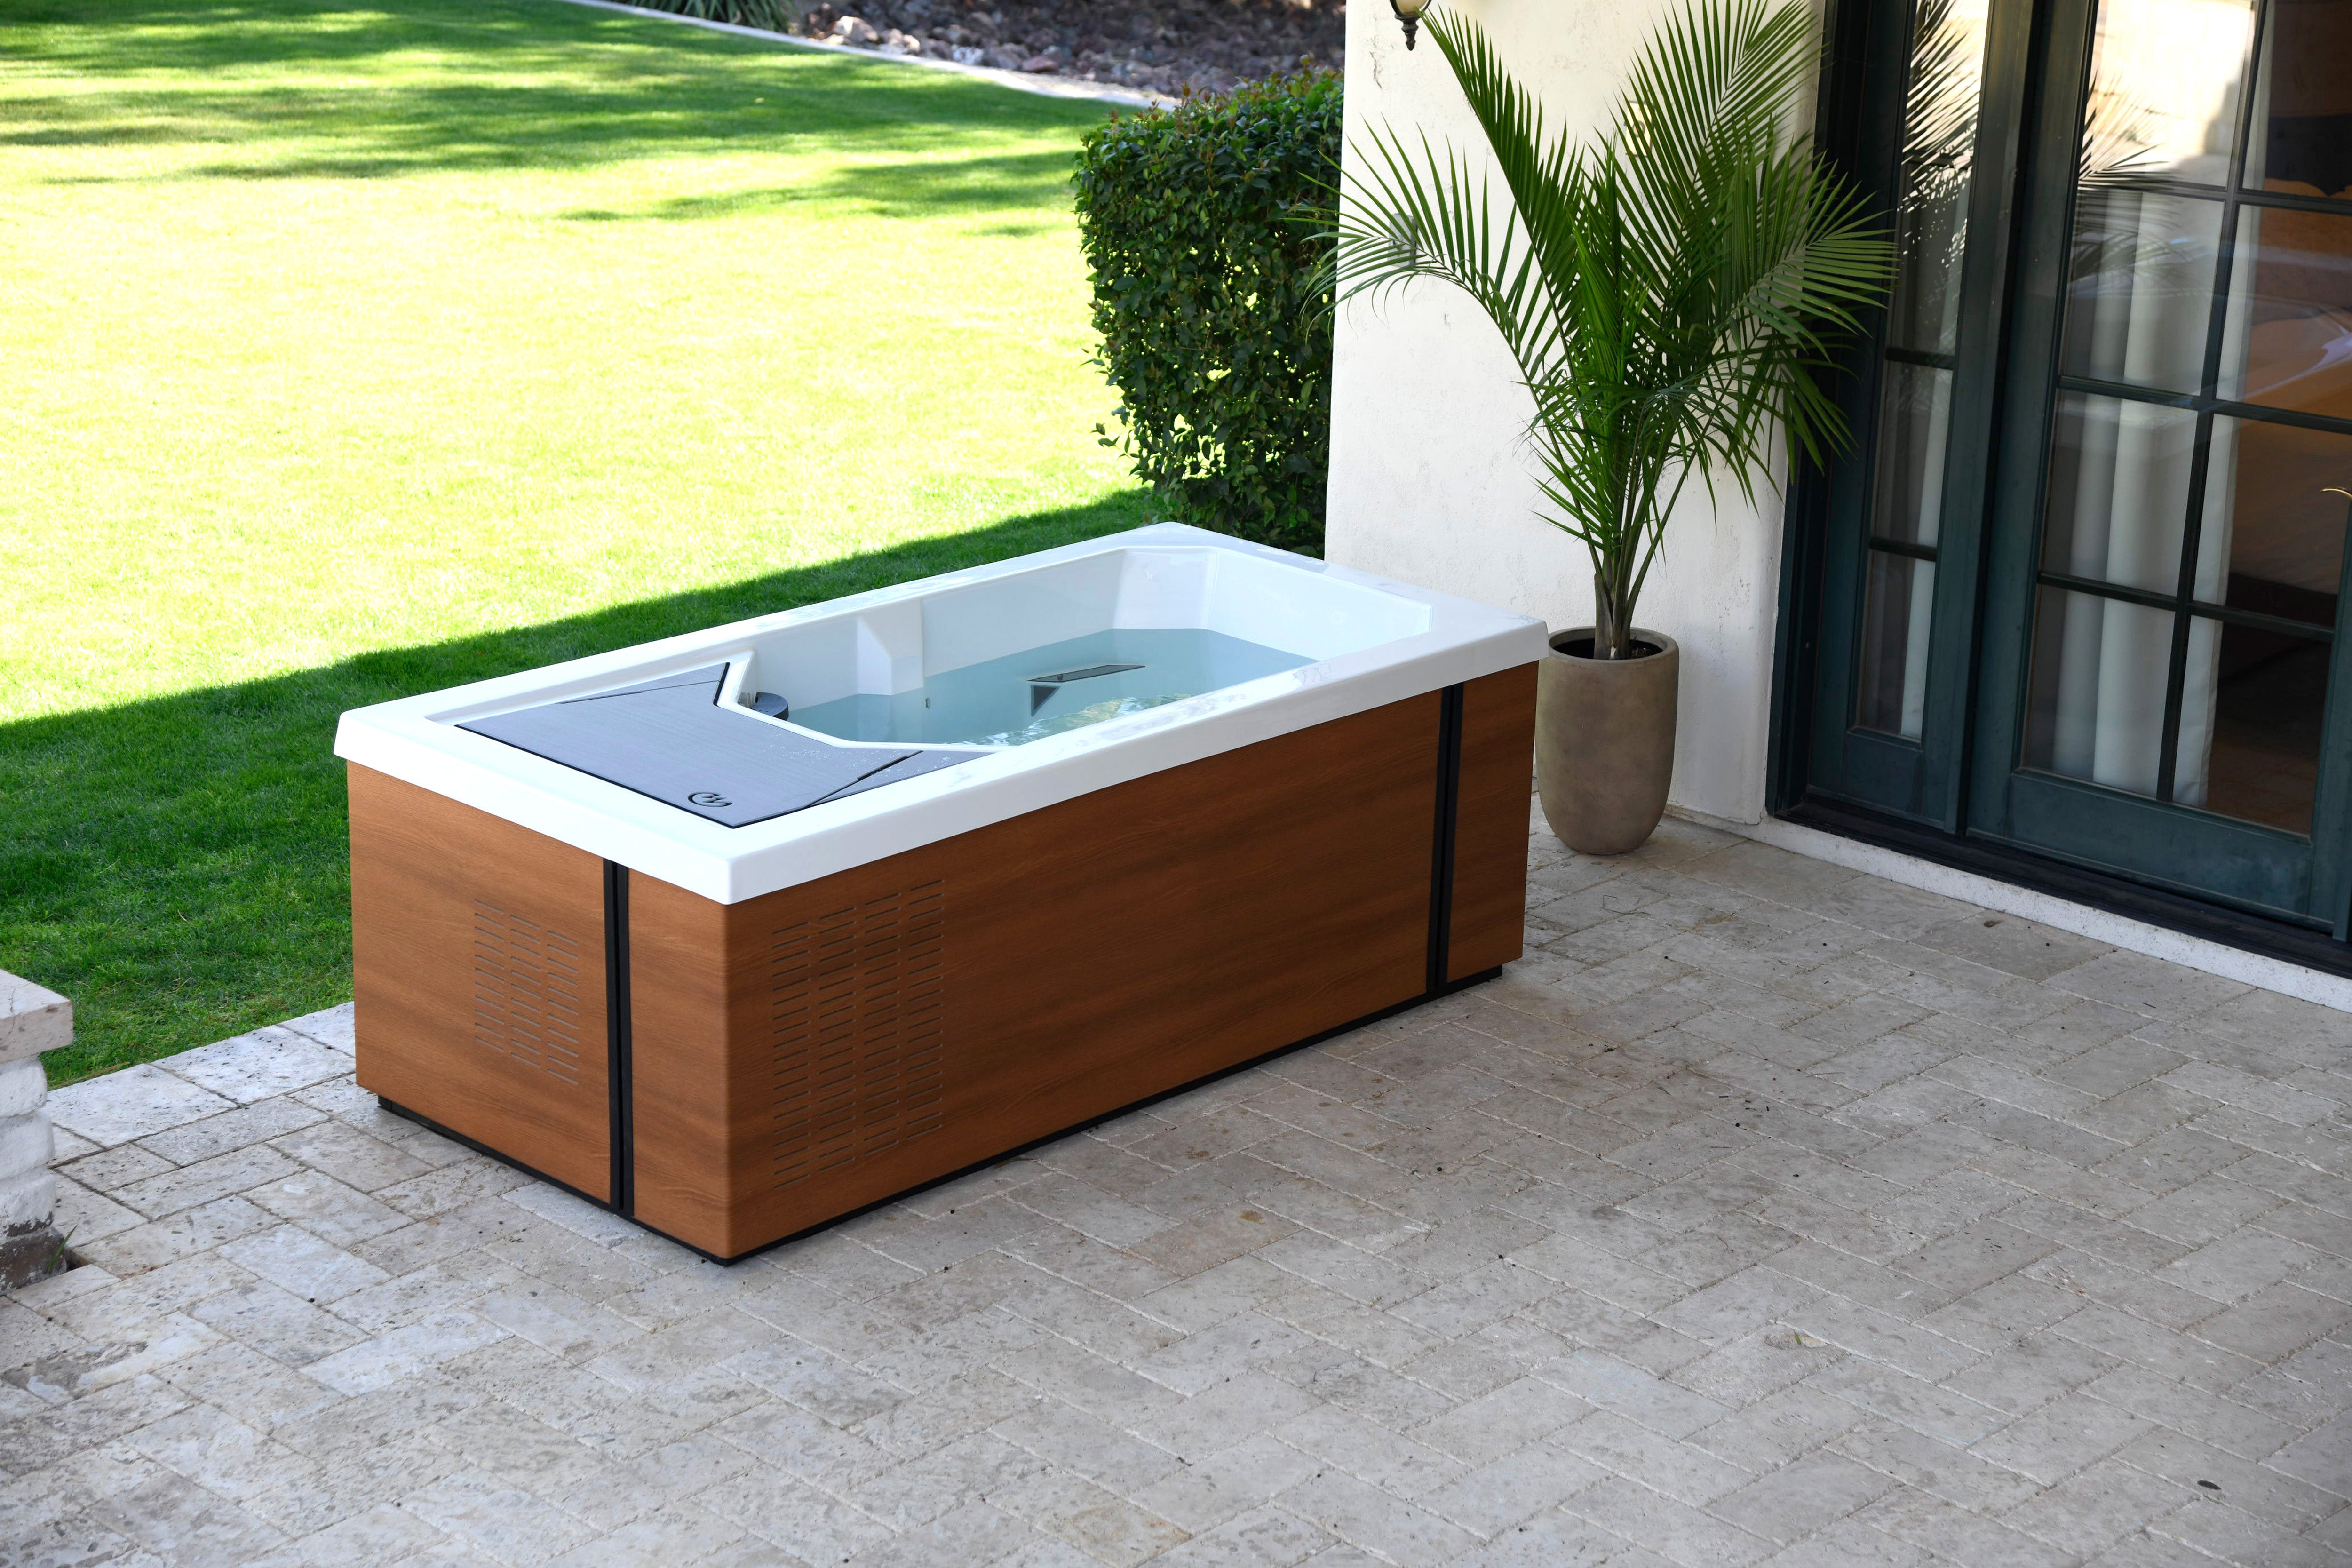 Alpine cold tub on a patio in front of grass